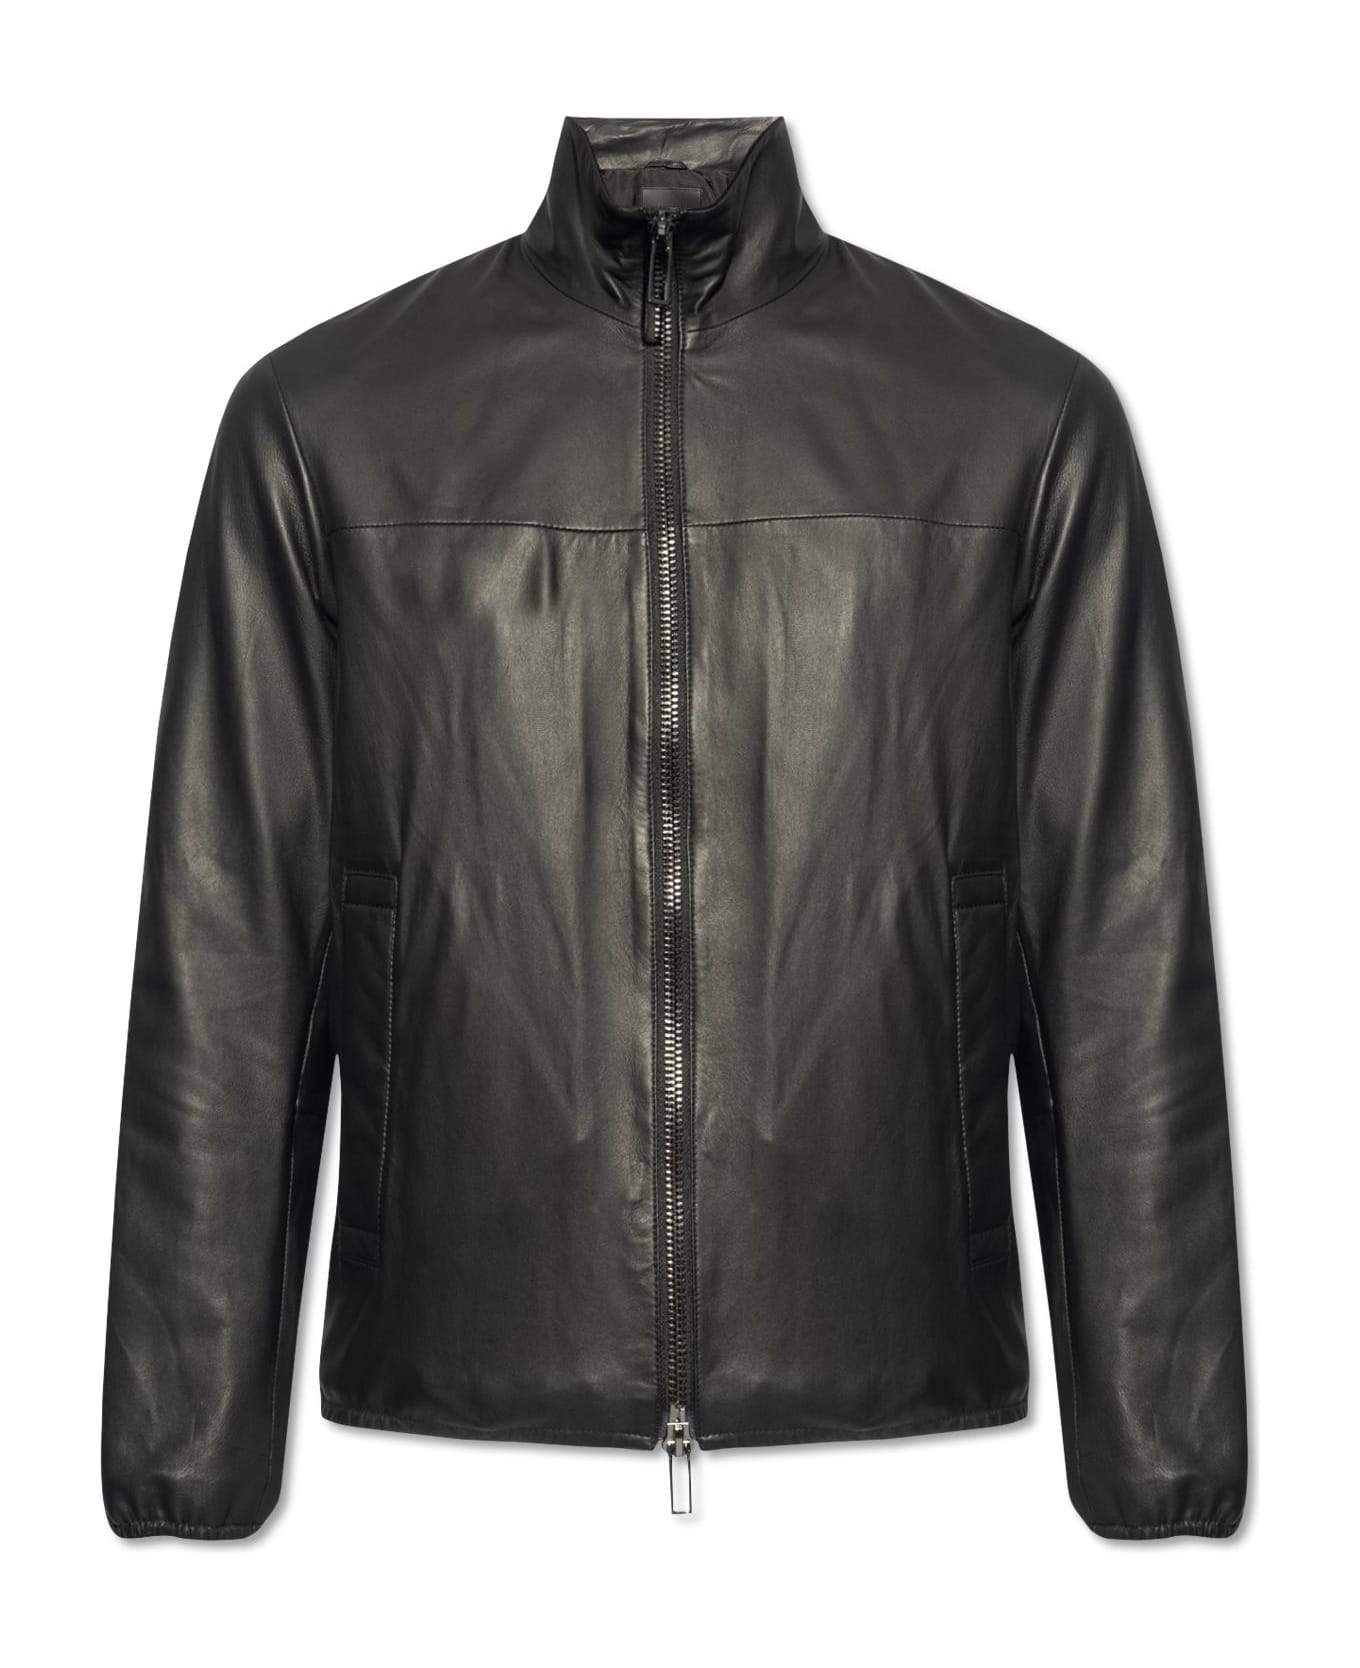 Emporio Armani Leather Jacket With Stand-up Collar - Black レザージャケット